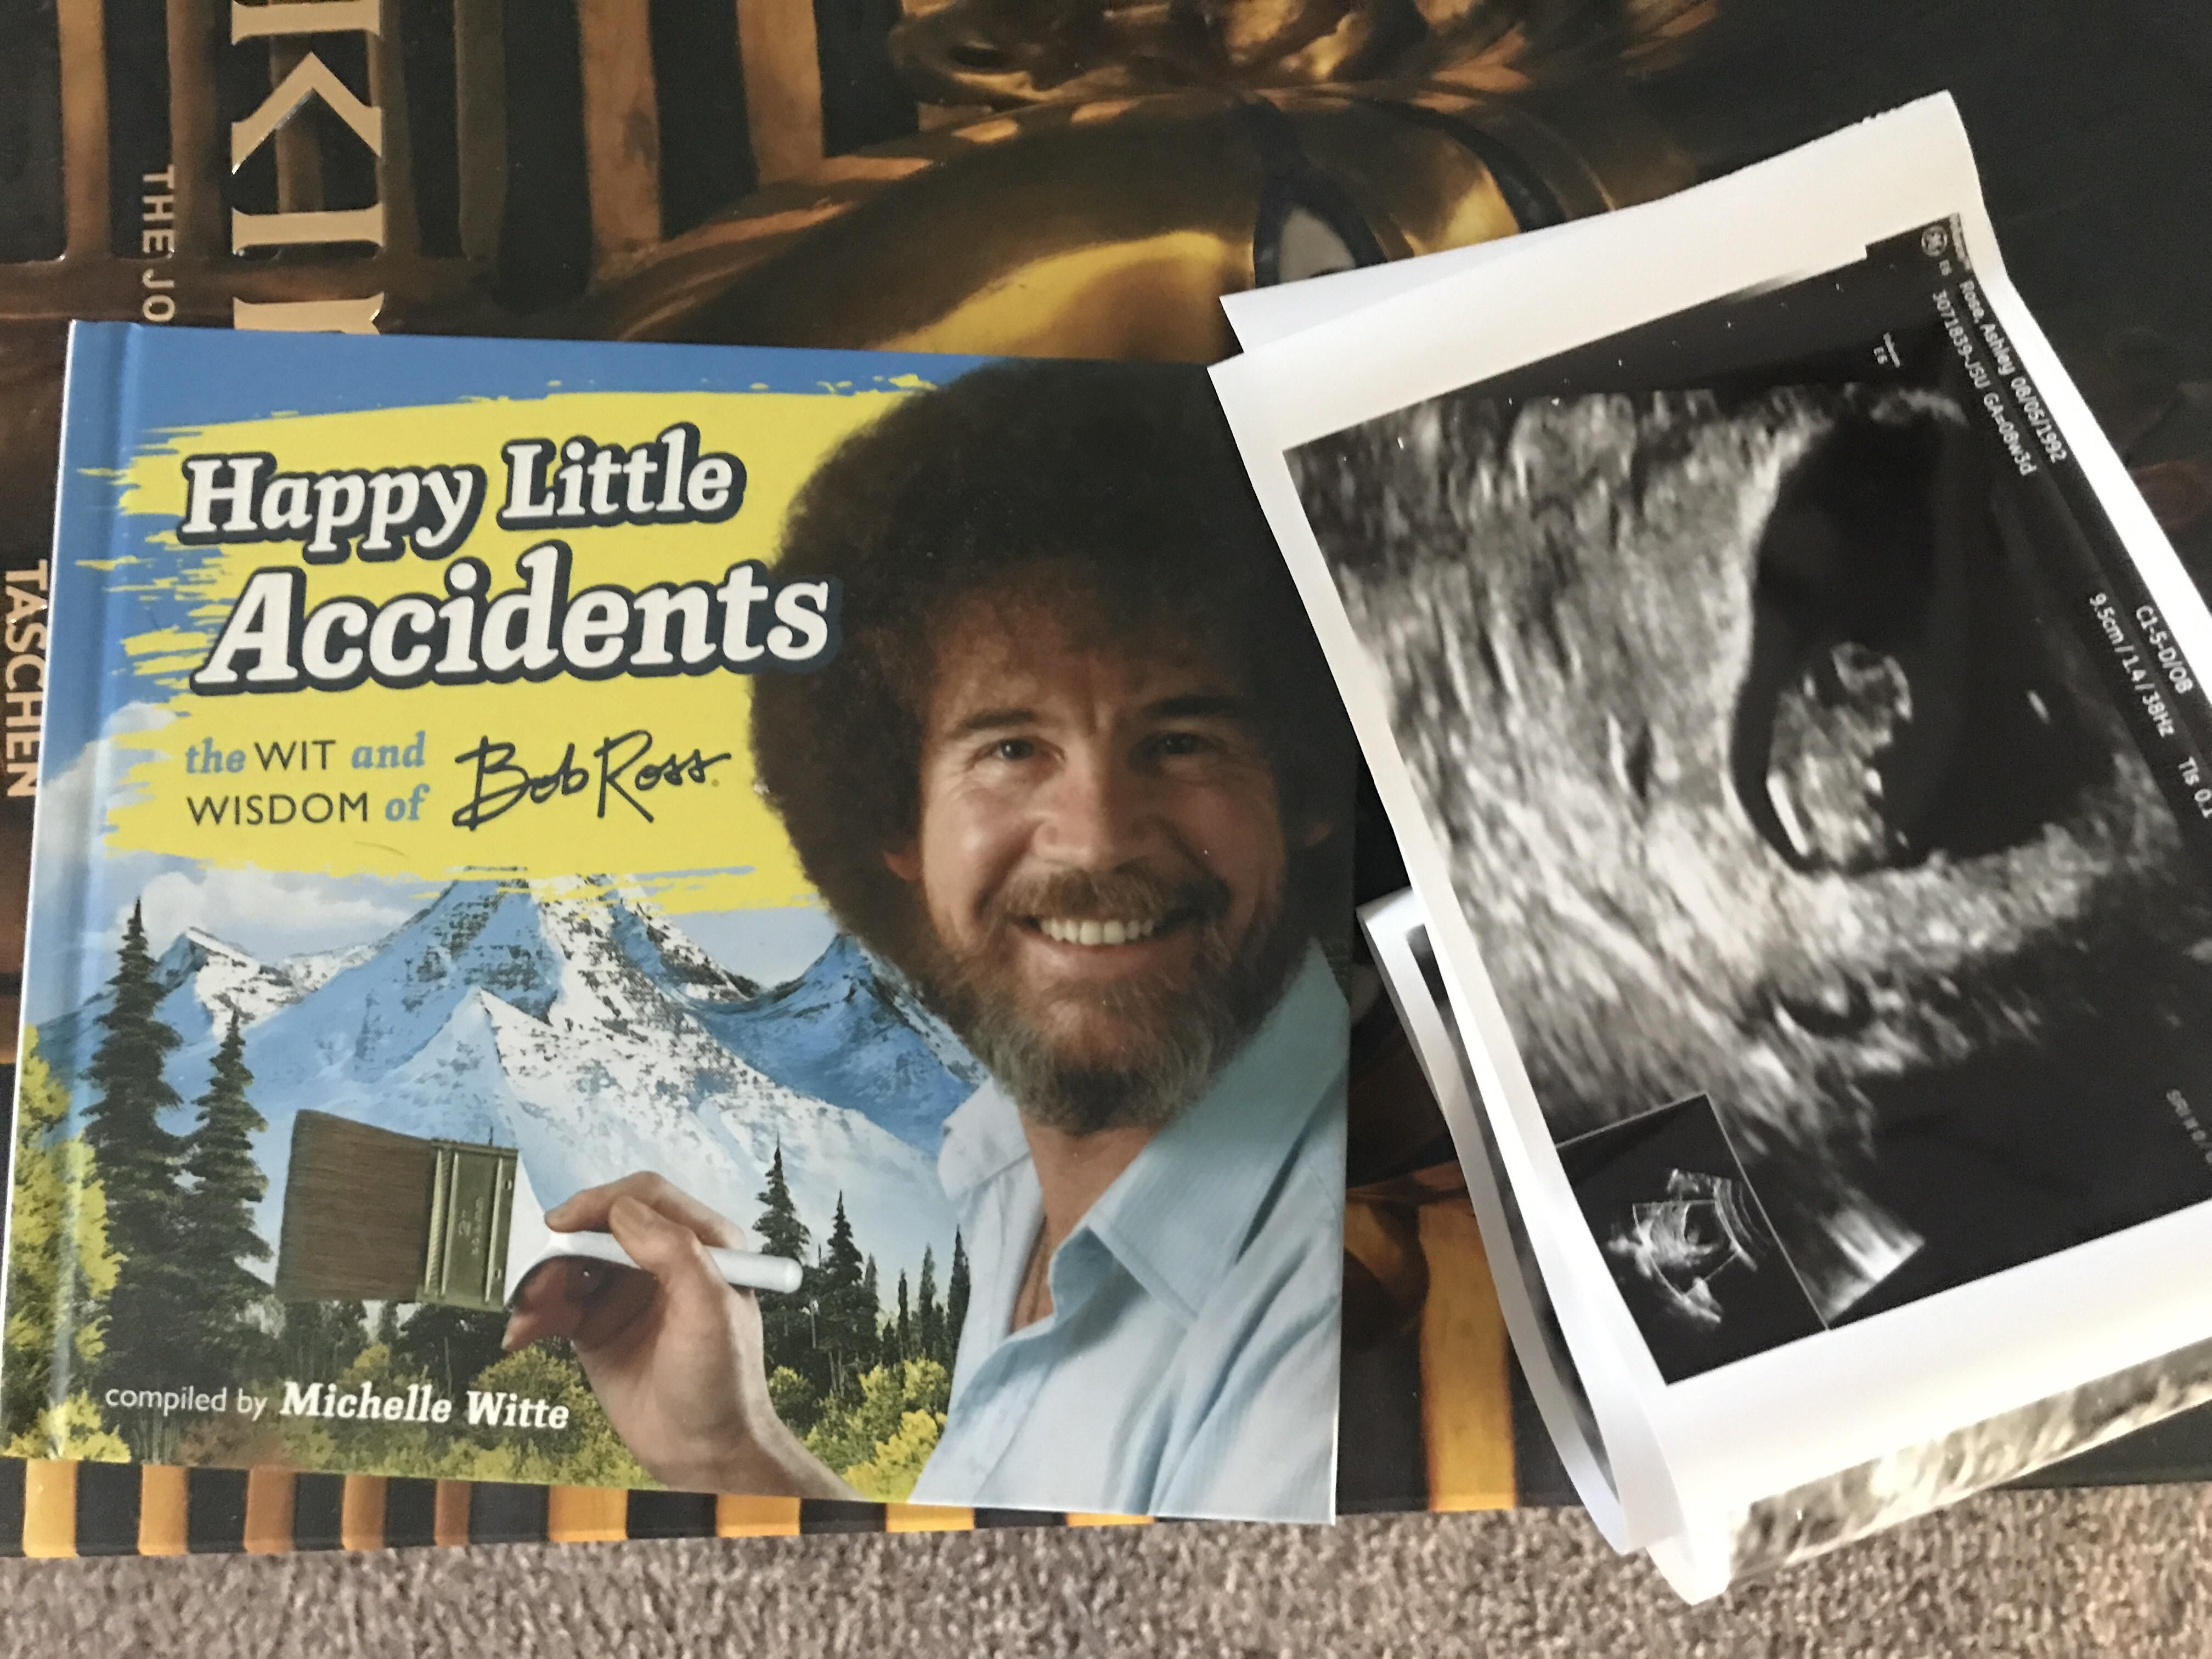 My wife gave me this Bob Ross book today. Inside was this picture.